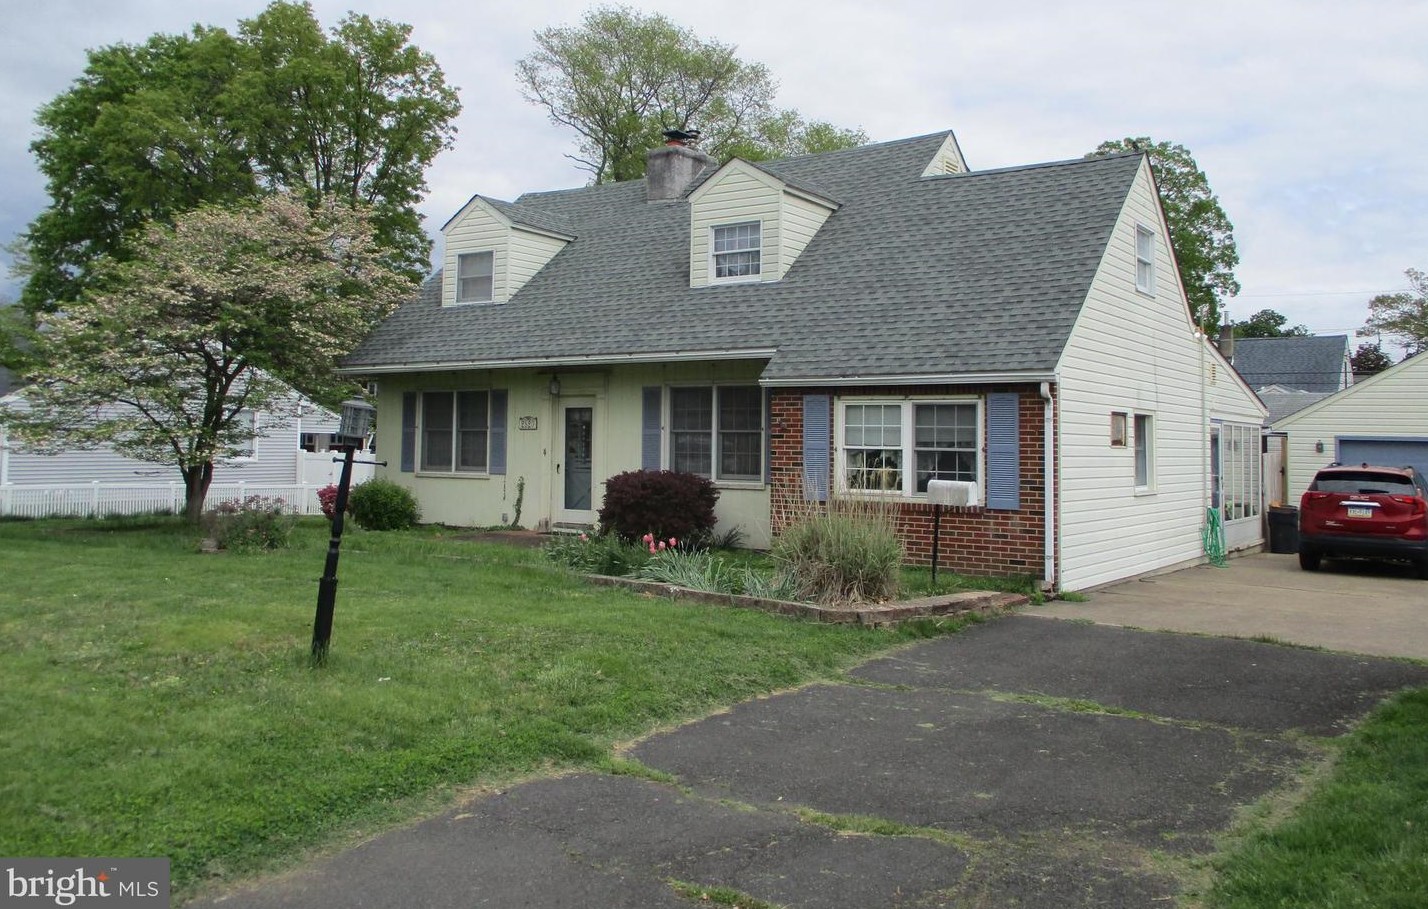 2520 Wood Ave, Edgely, PA 19007